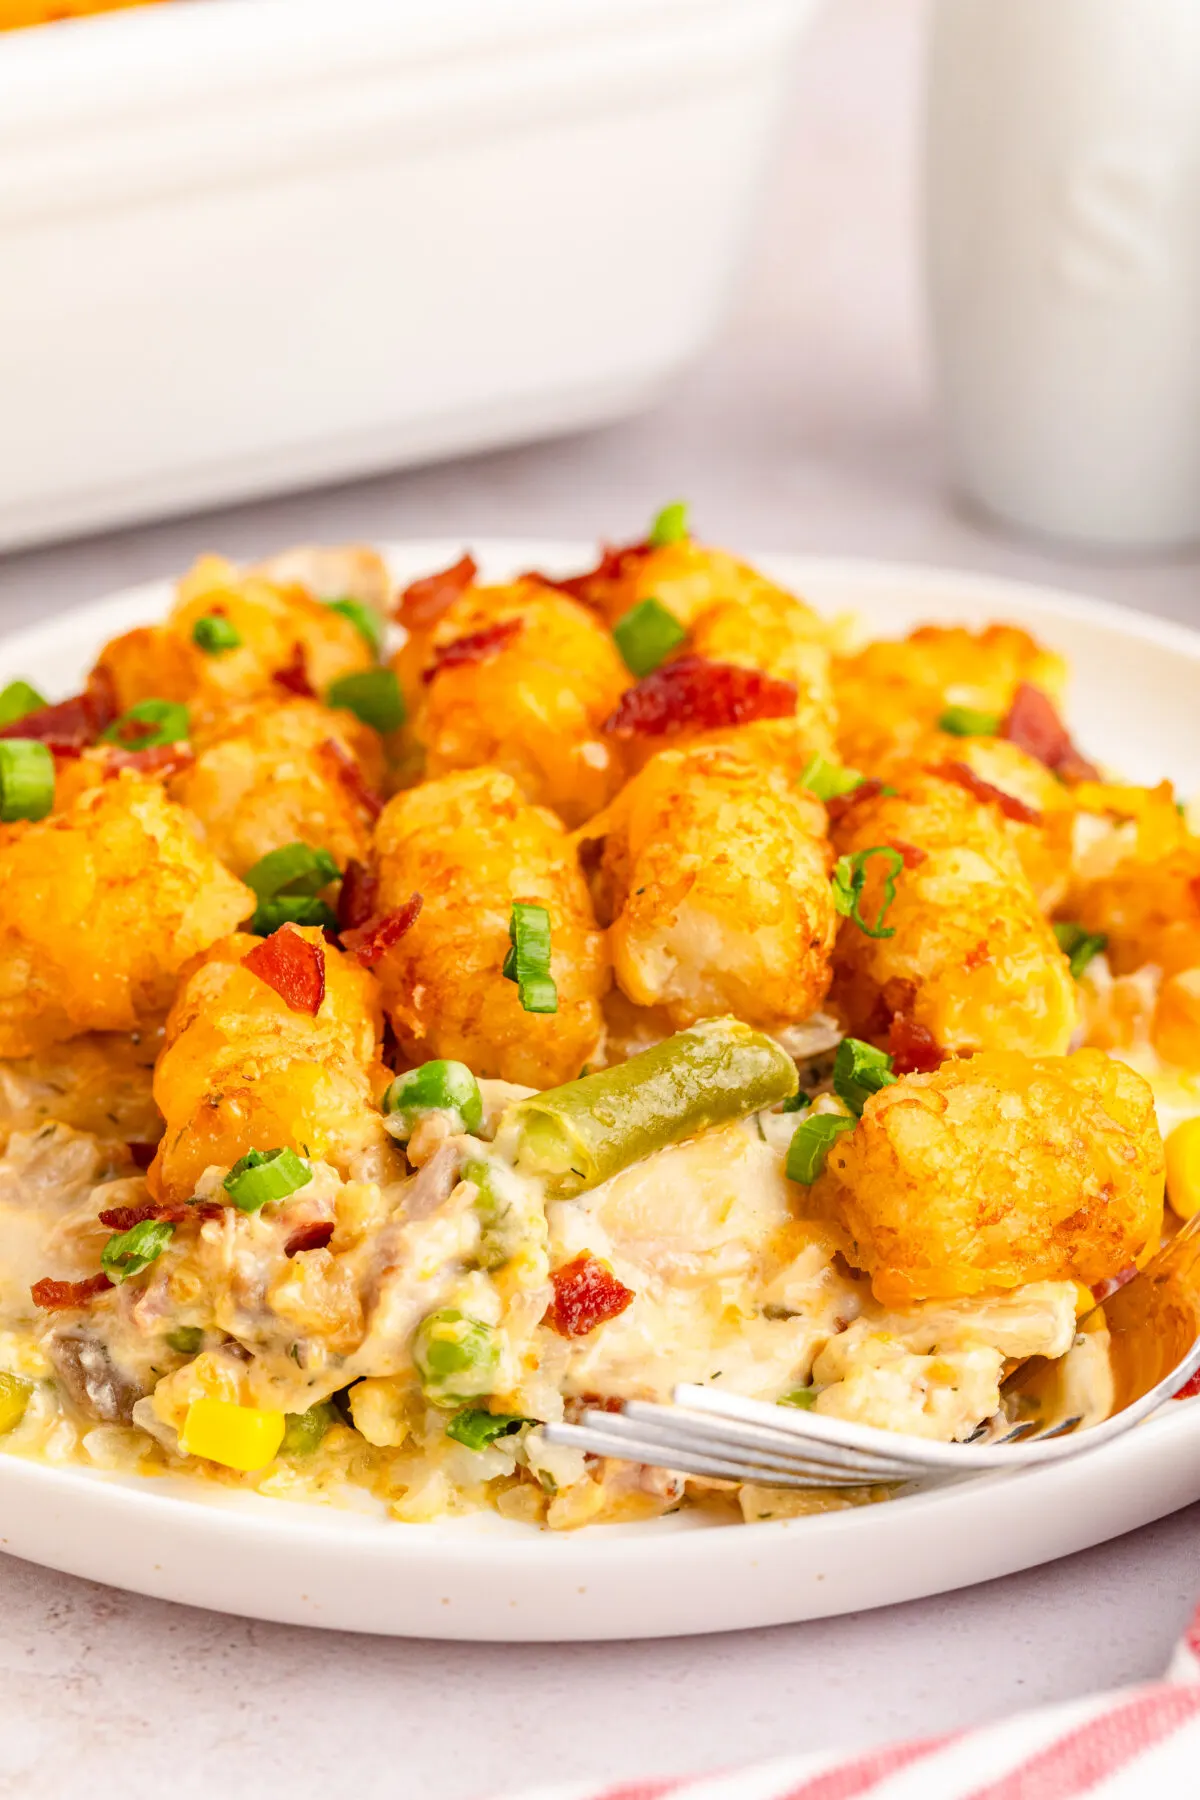 Craving comfort food? Look no further than our mouth-watering chicken tater tot casserole recipe. Perfect for any night of the week!